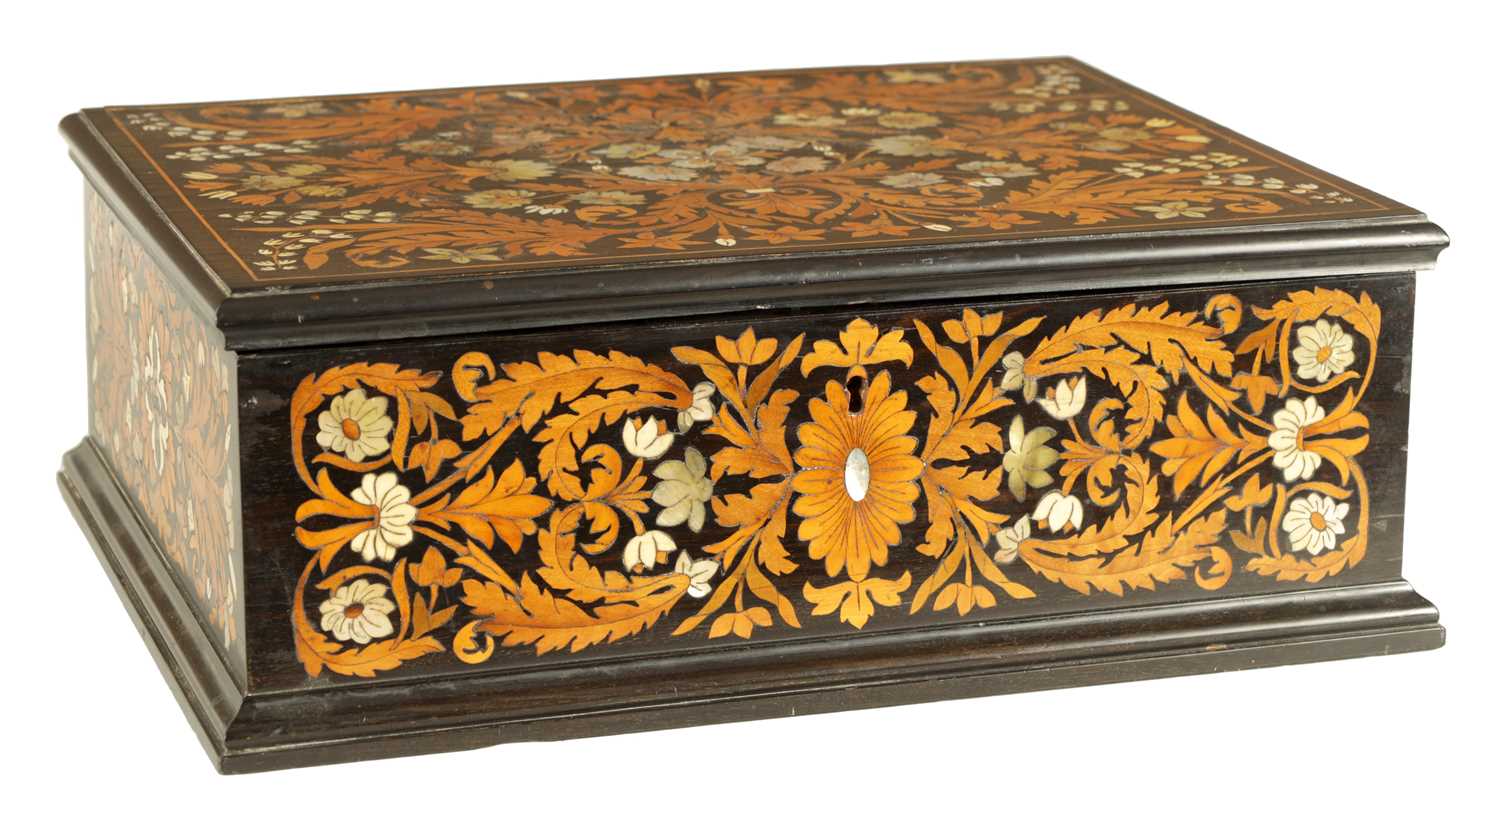 A FINE 18TH/19TH CENTURY ITALIAN FLORAL MARQUETRY EBONY, IVORY AND MOTHER OF PEARL INLAID TABLE BOX